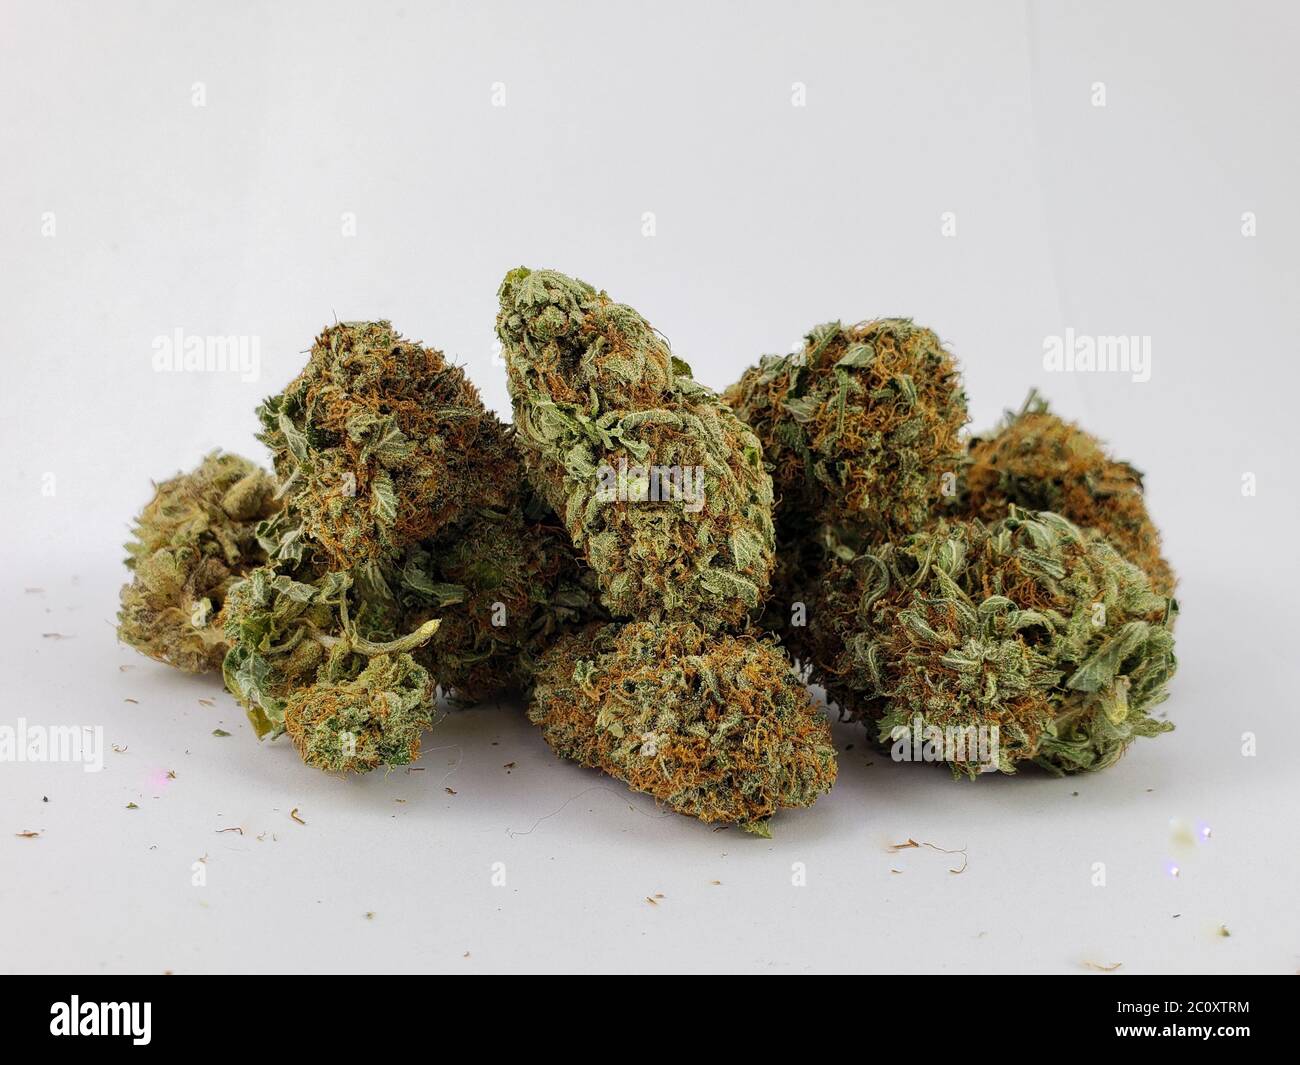 Group of dry flower Sativa cannabis buds close-up in front of a white background Stock Photo